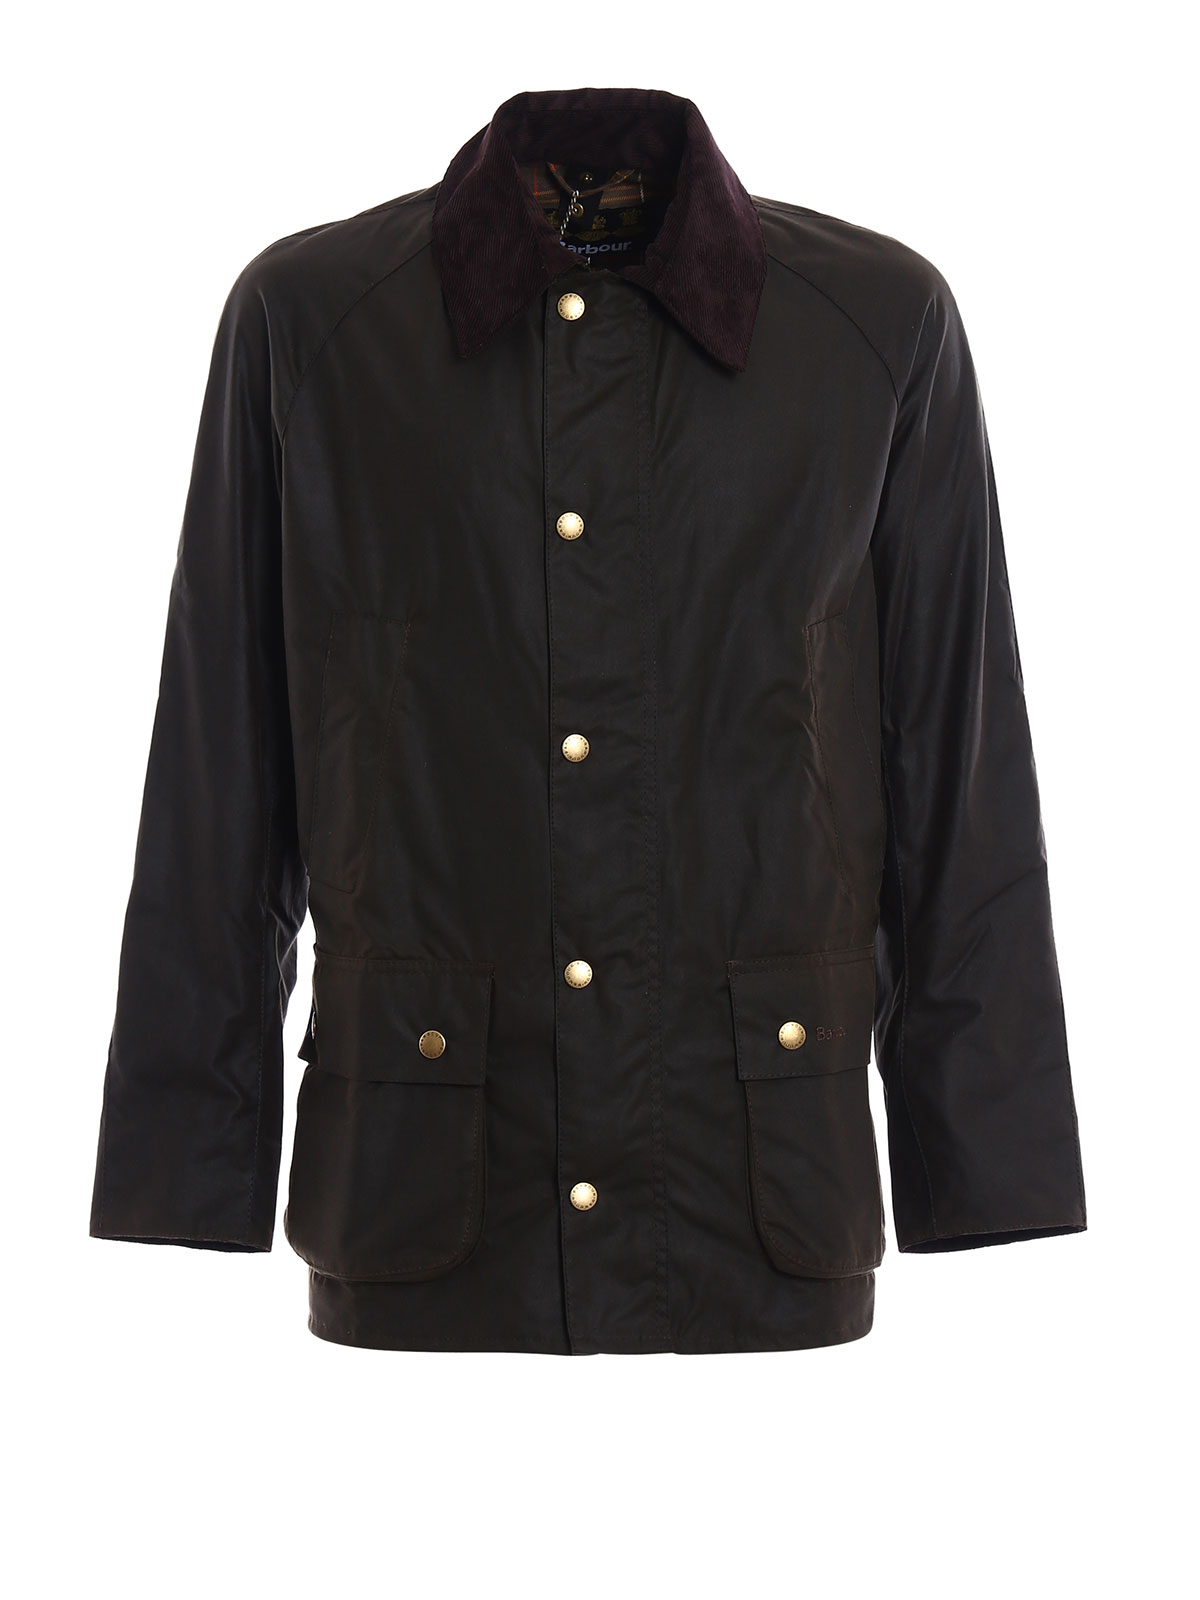 Barbour - Ashby wax cotton jacket - casual jackets - BACPS0819OL71